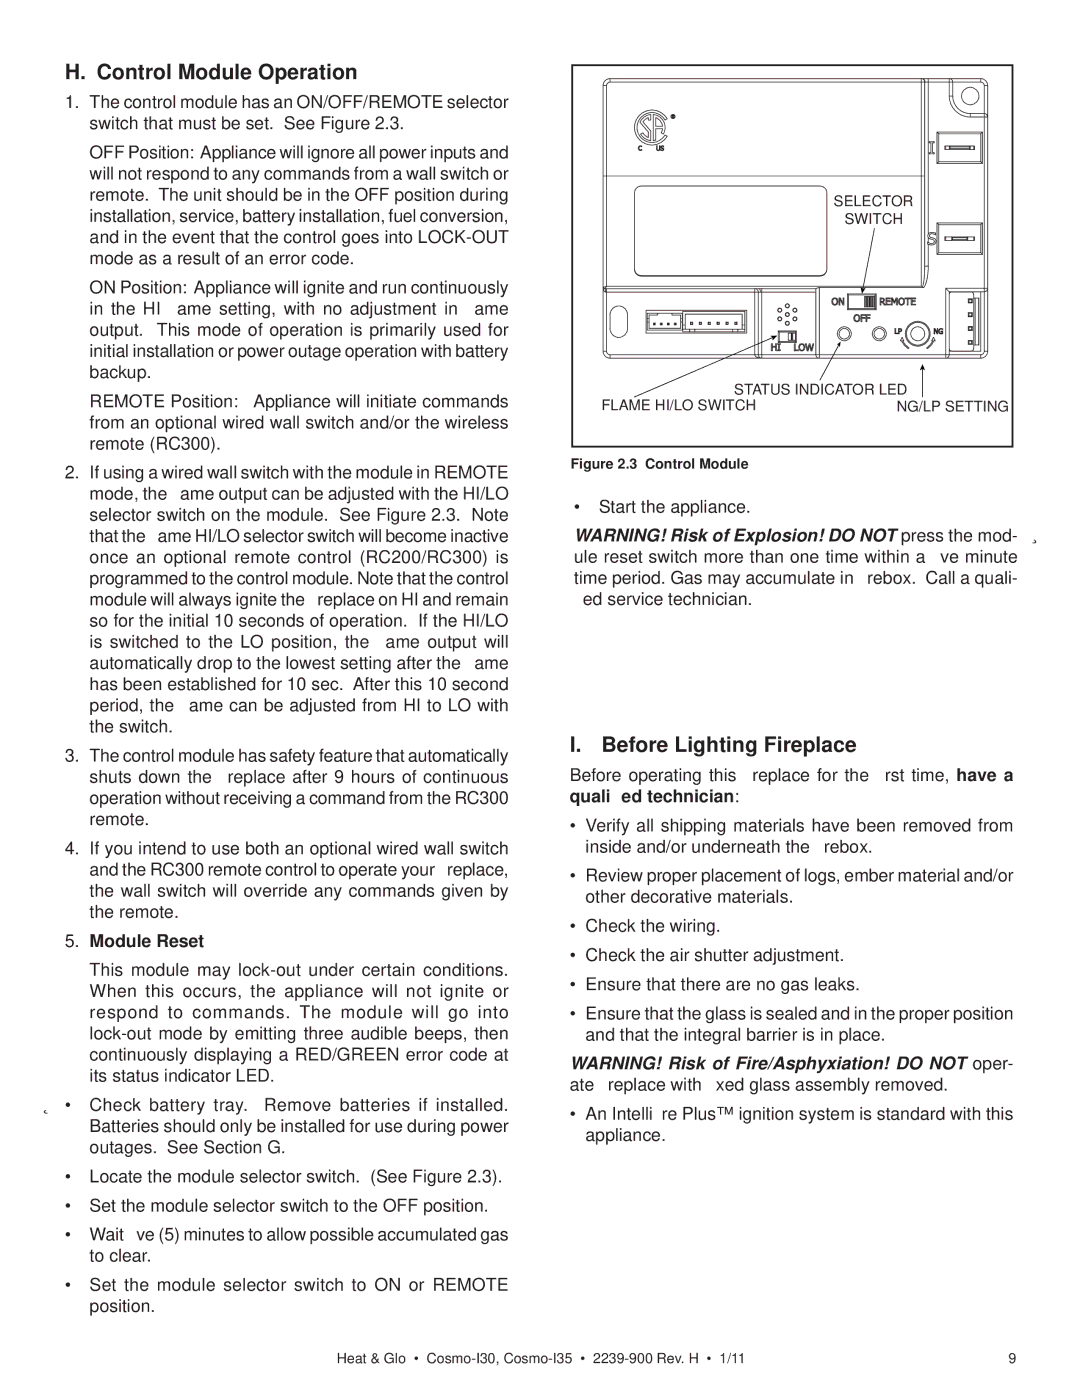 Heat & Glo LifeStyle COSMO-I30, COSMO-I35 owner manual Control Module Operation, Before Lighting Fireplace, Module Reset 